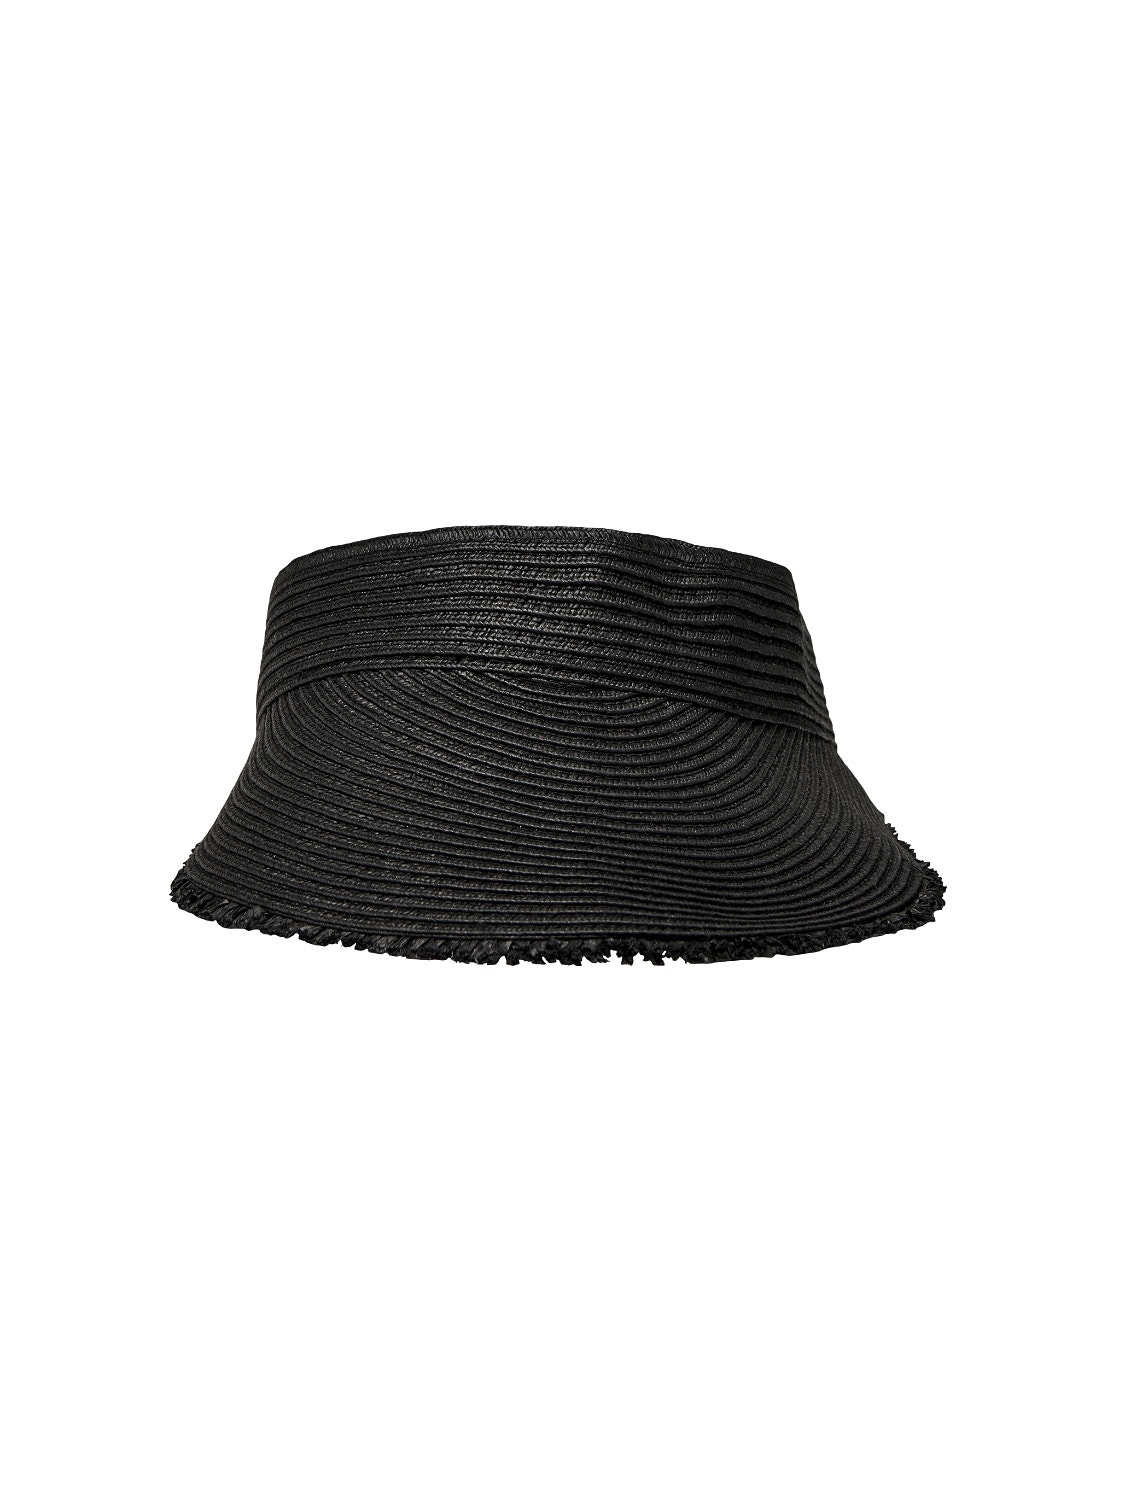 ONLY Straw shade Cap -Black - 15263915